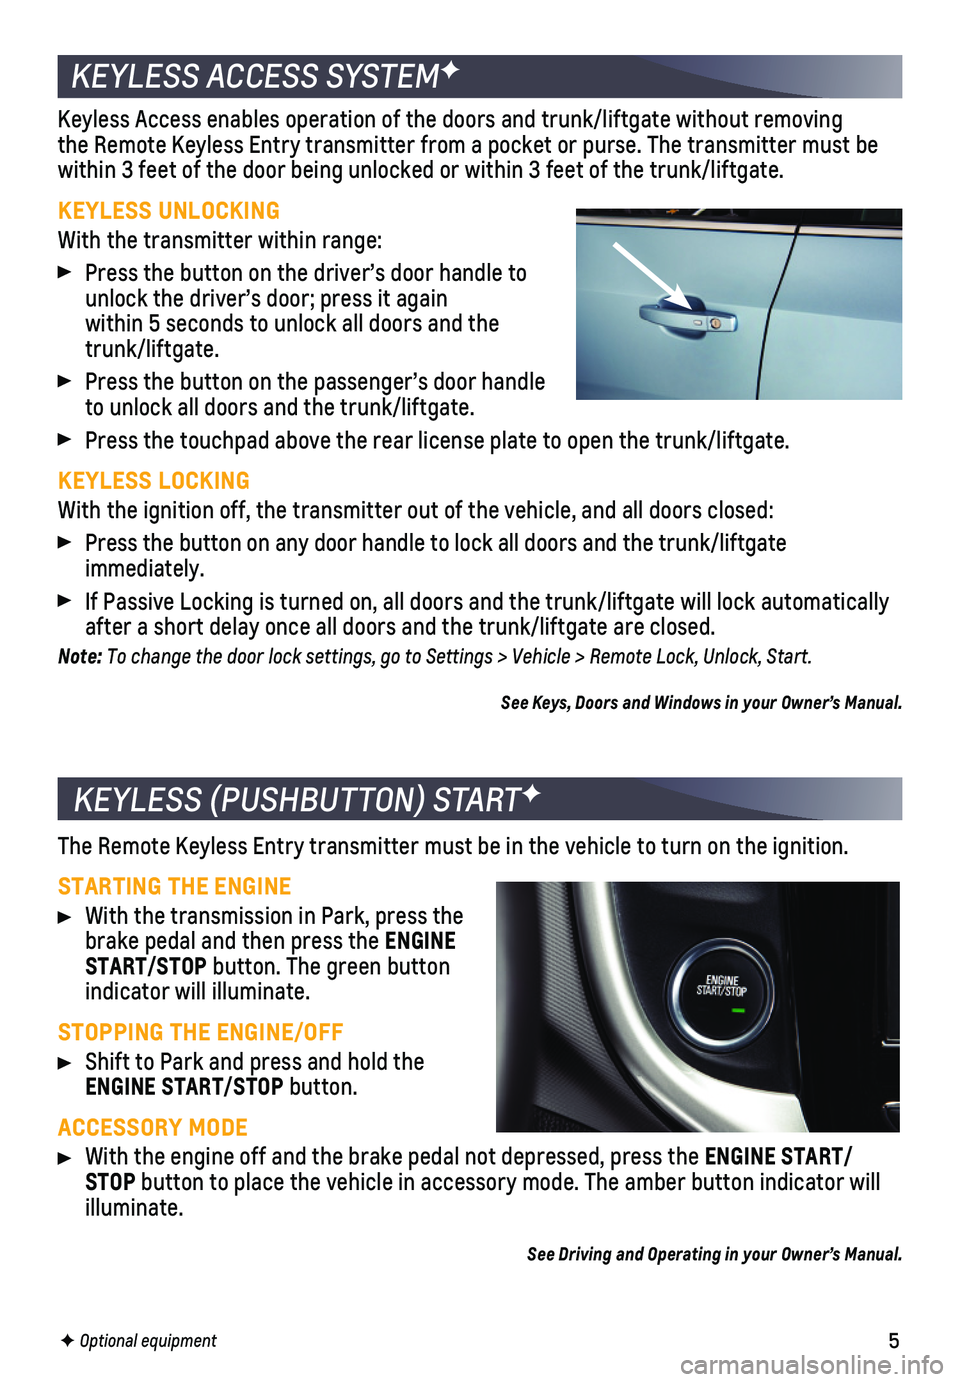 CHEVROLET SONIC 2020  Get To Know Guide 5
KEYLESS ACCESS SYSTEMF
Keyless Access enables operation of the doors and trunk/liftgate without\
 removing the Remote Keyless Entry transmitter from a pocket or purse. The transmi\
tter must be  
wi